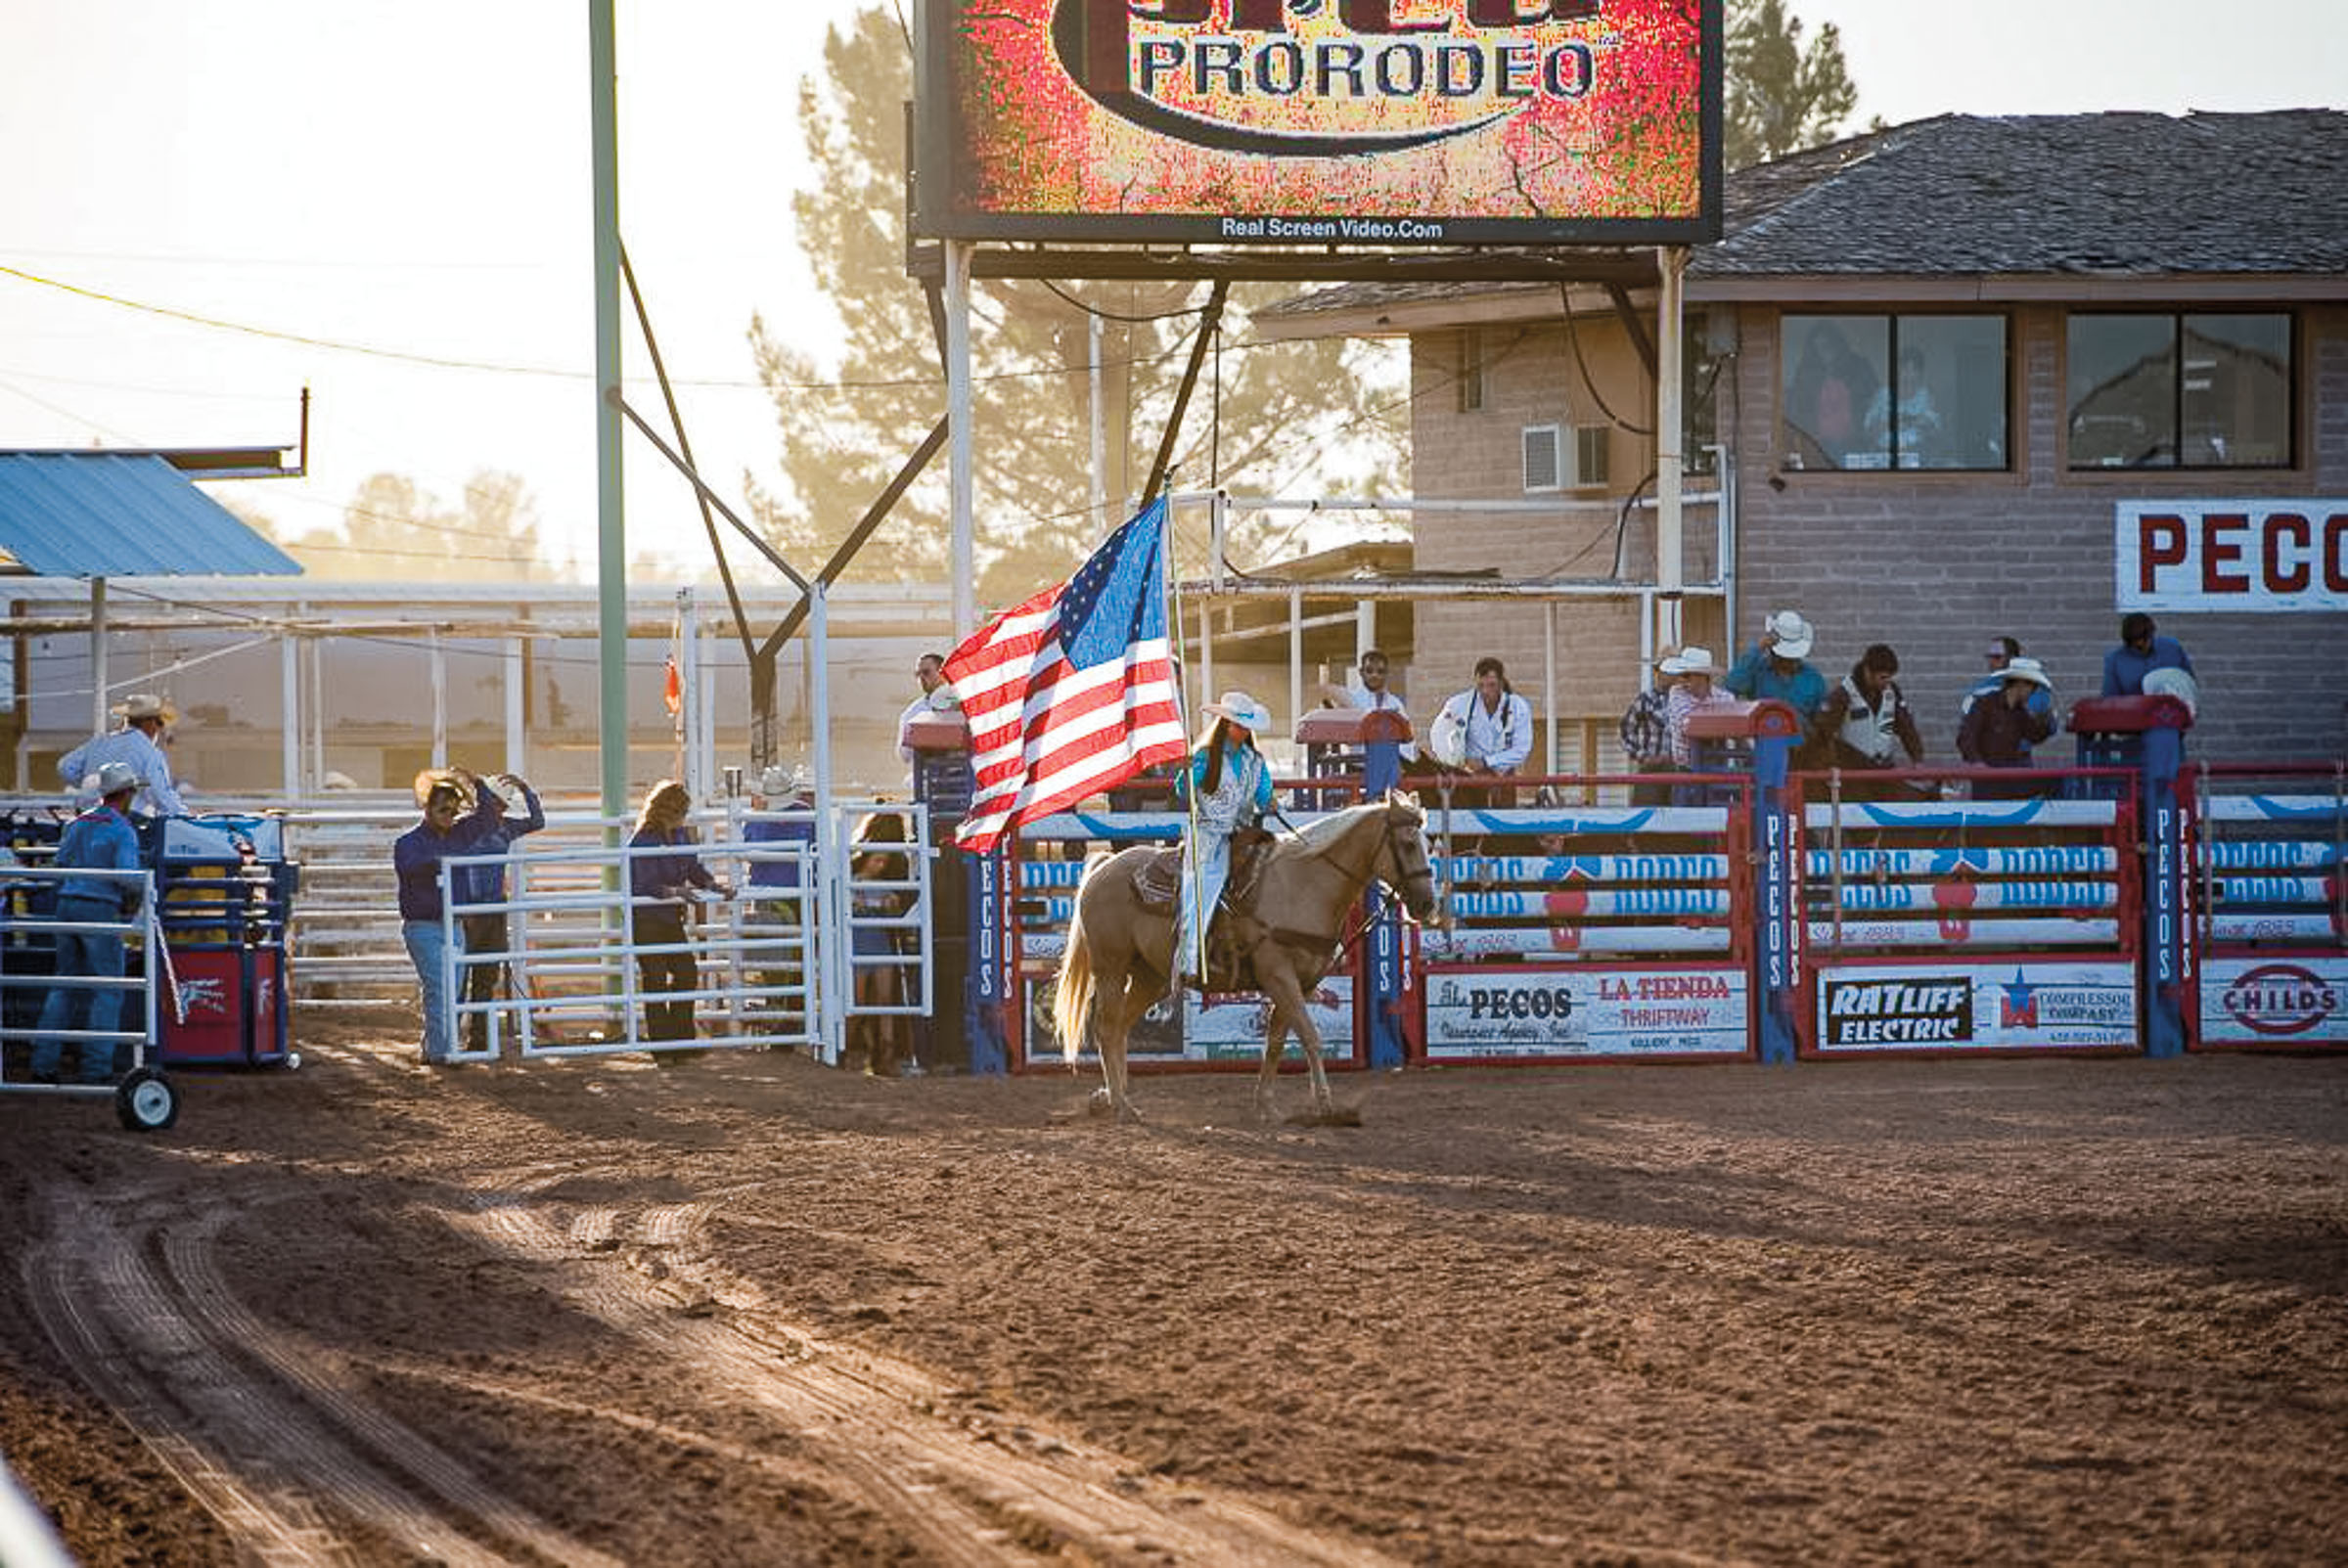 one of the west Texas Dandies parades the flag during the opening ceremony at the West of Pecos Rodeo.